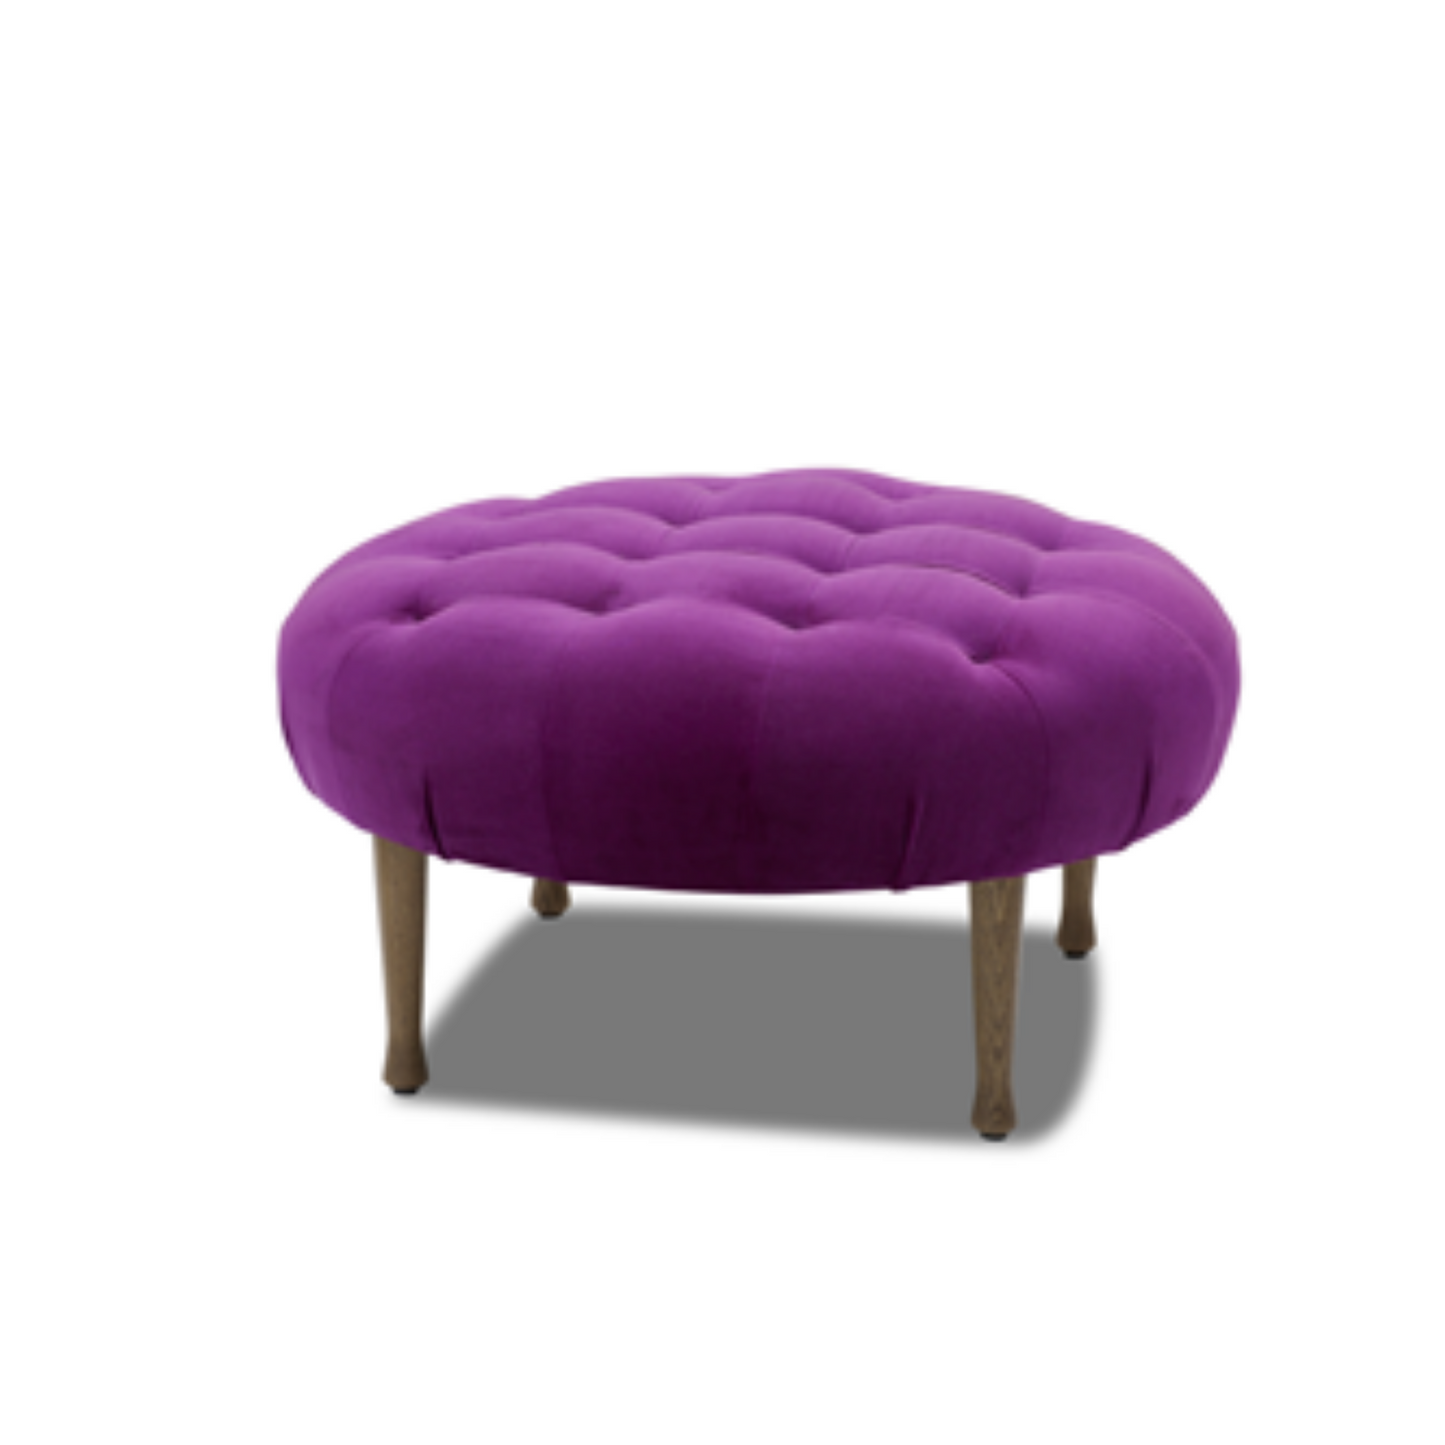 Dimple Ottomans by Molmic